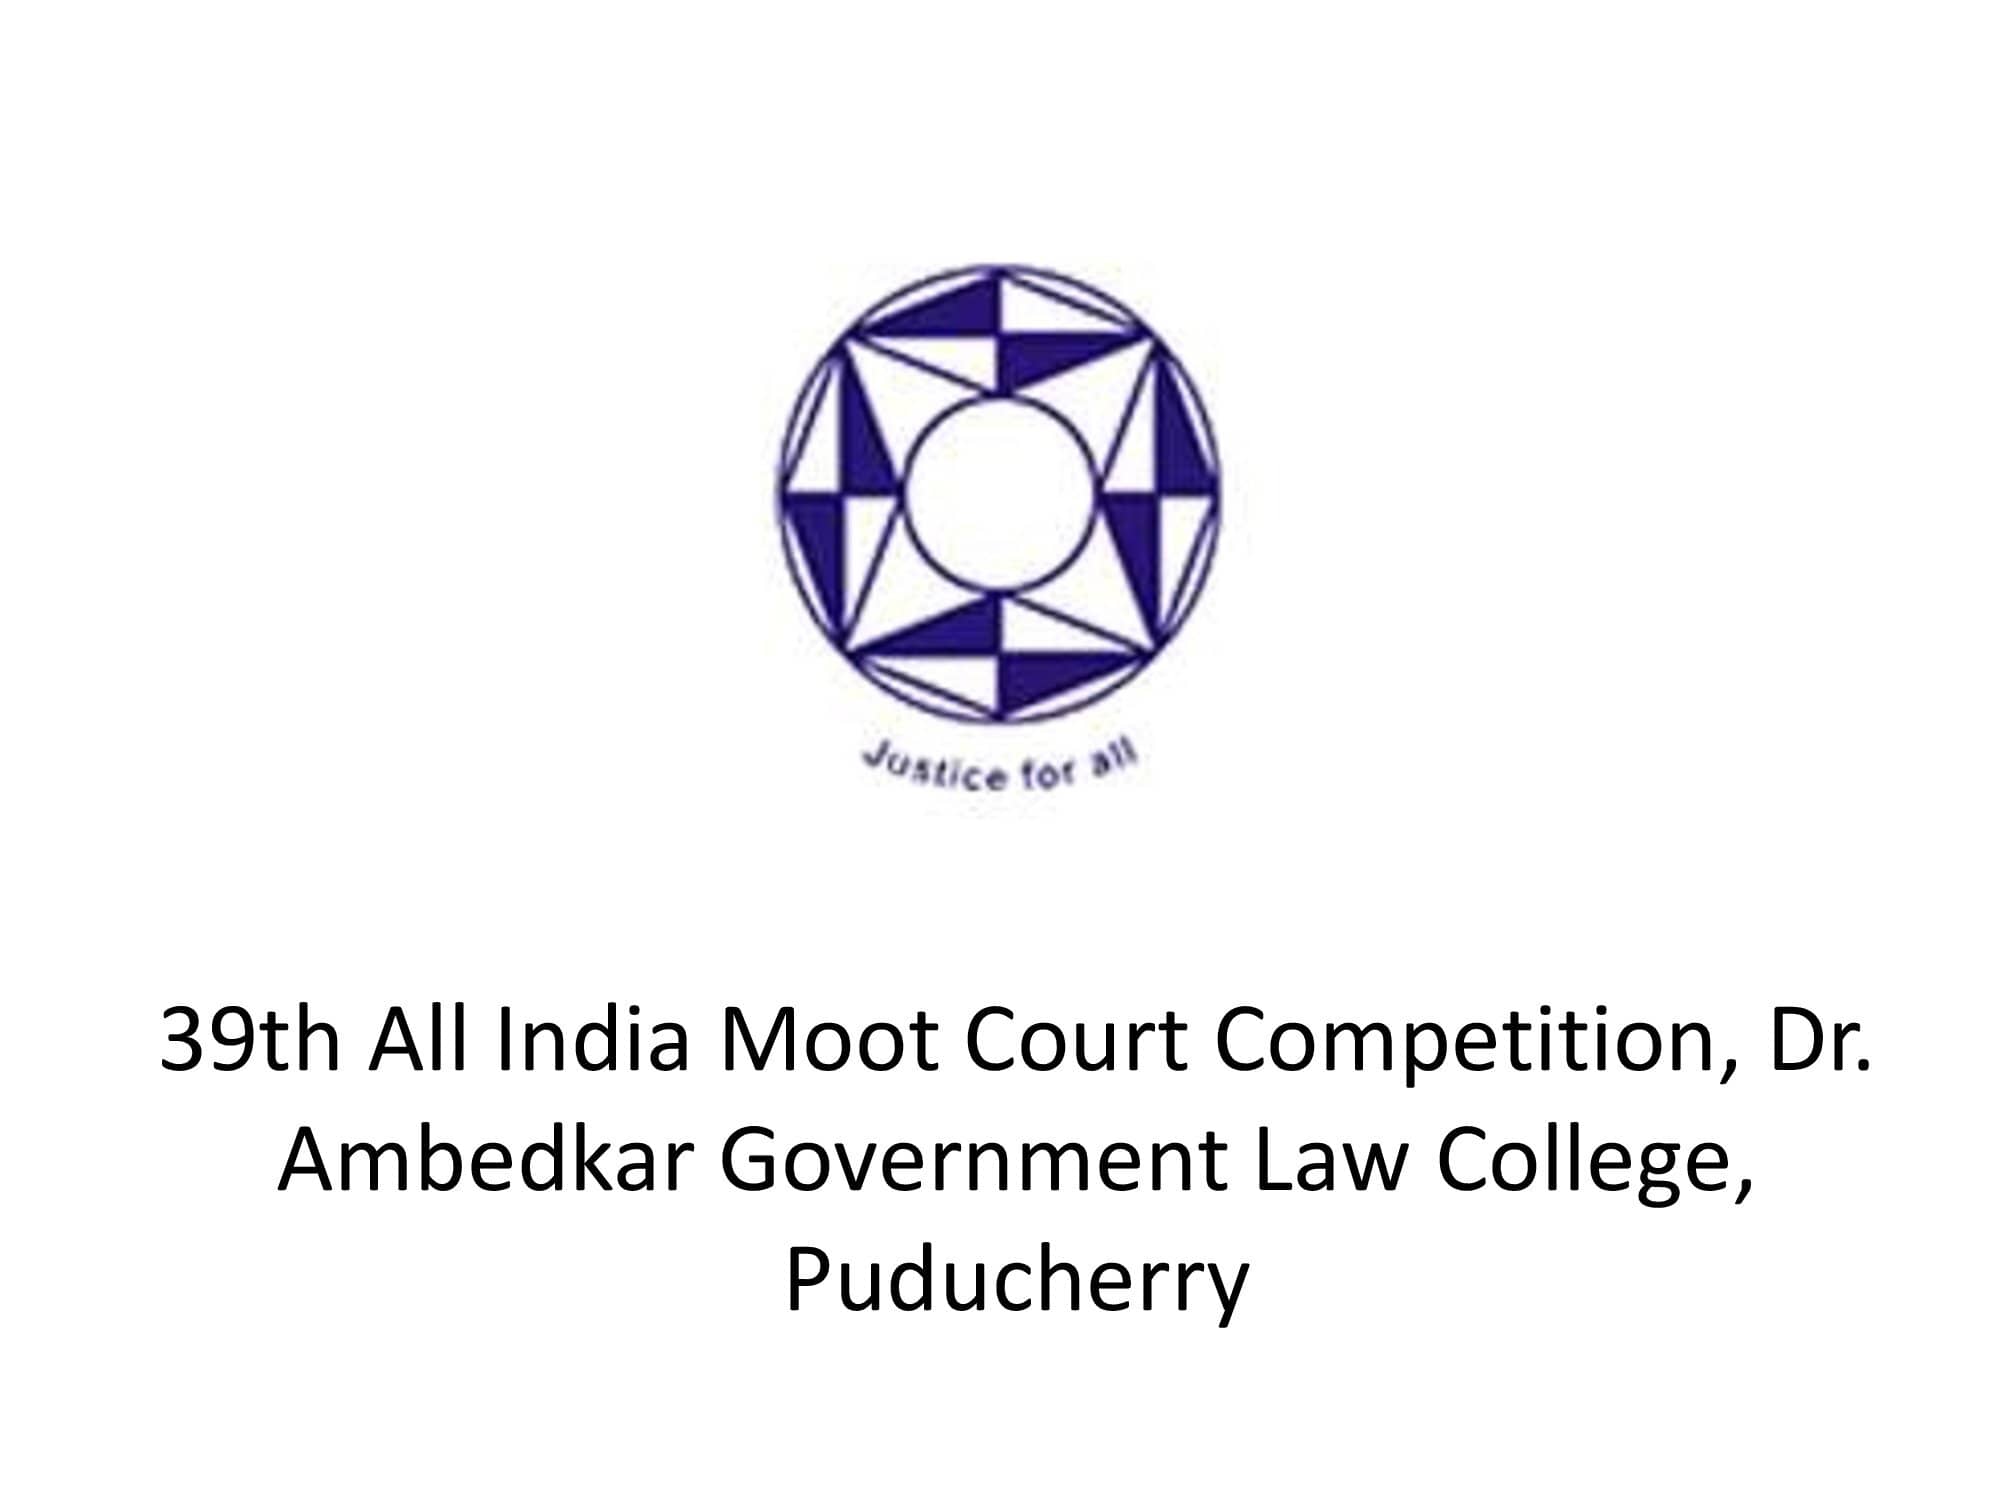 39th All India Moot Court Competition, Dr. Ambedkar Government Law College, Puducherry